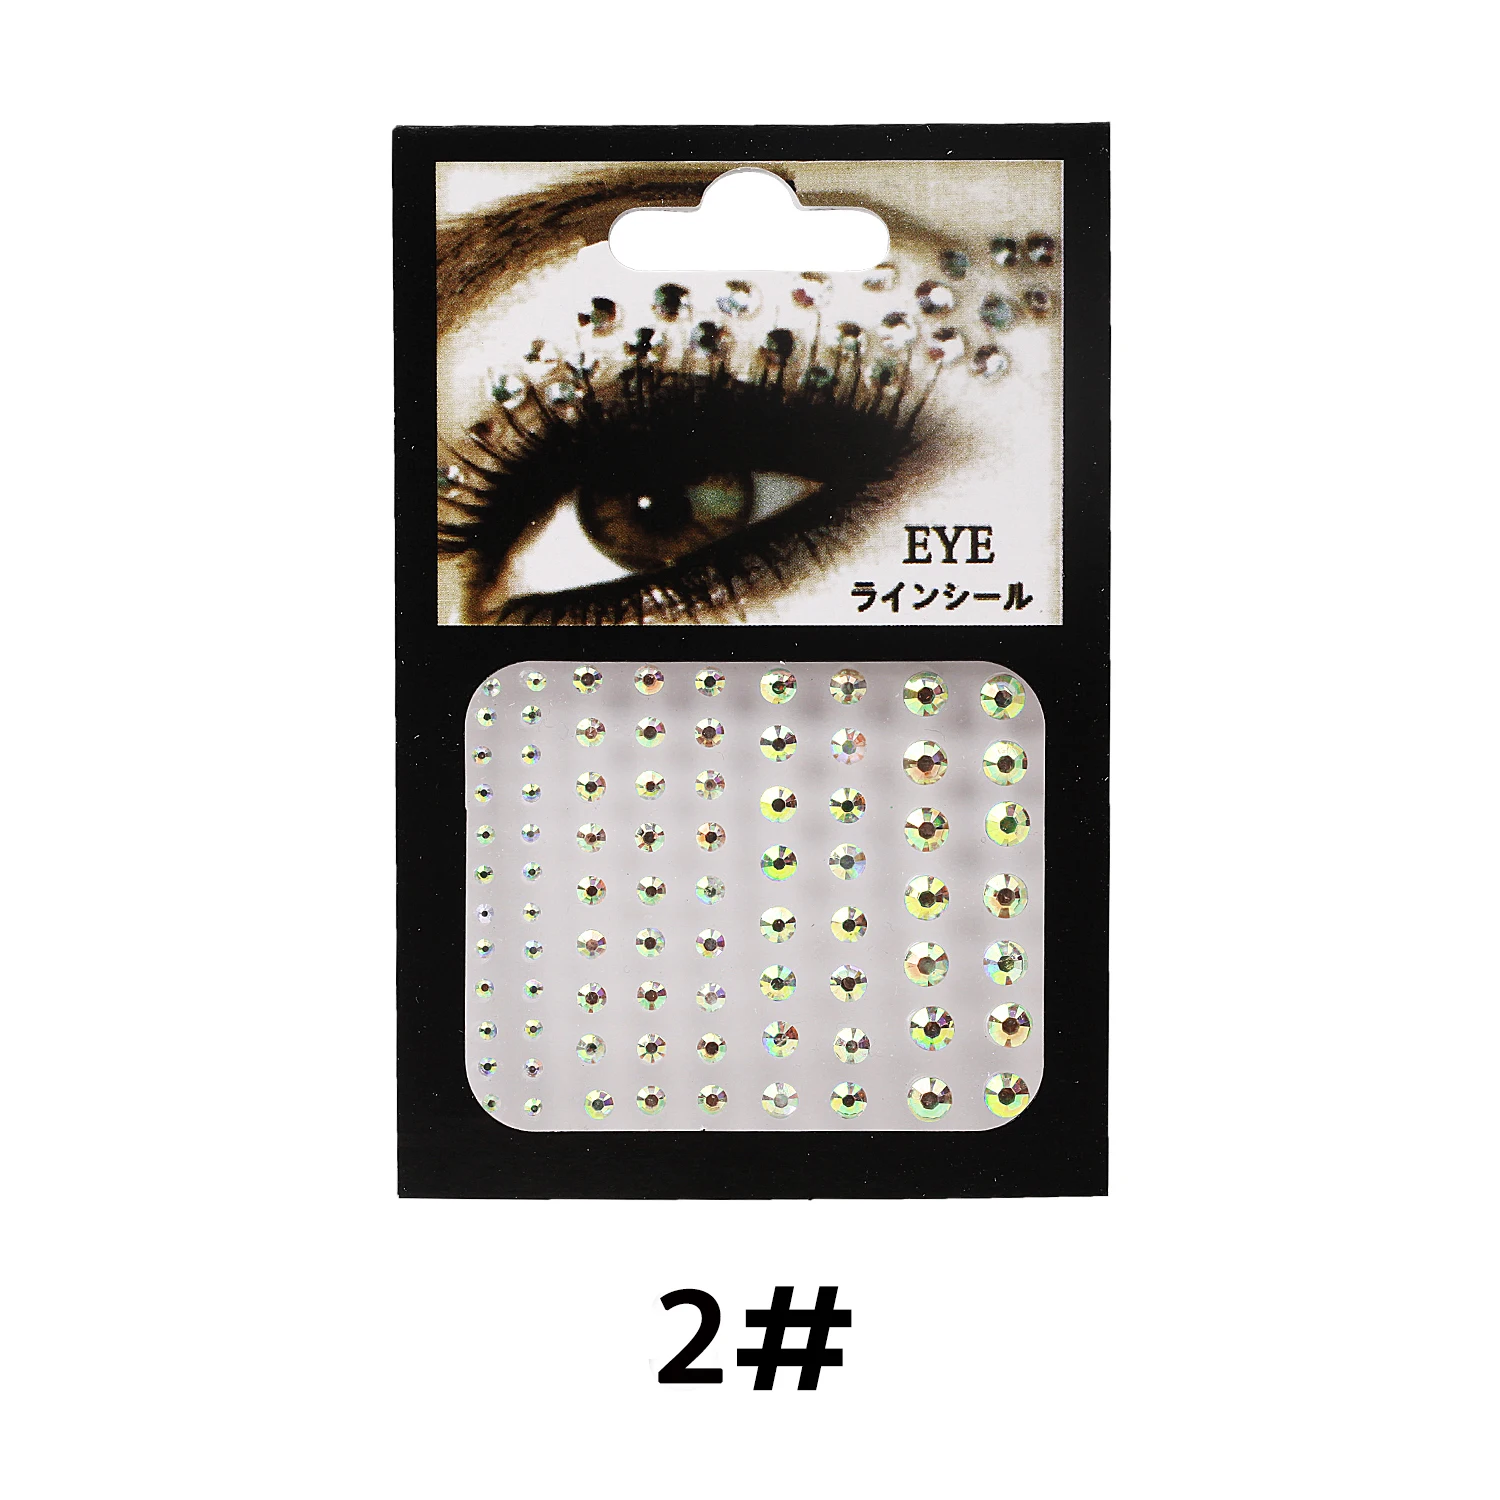 1PC 3D Sexy Crystal Eyes Glitter Face Body DIY Diamond Festival Party Jewel Makeup Tools Eye Shiner Make Up Adornment Sticker